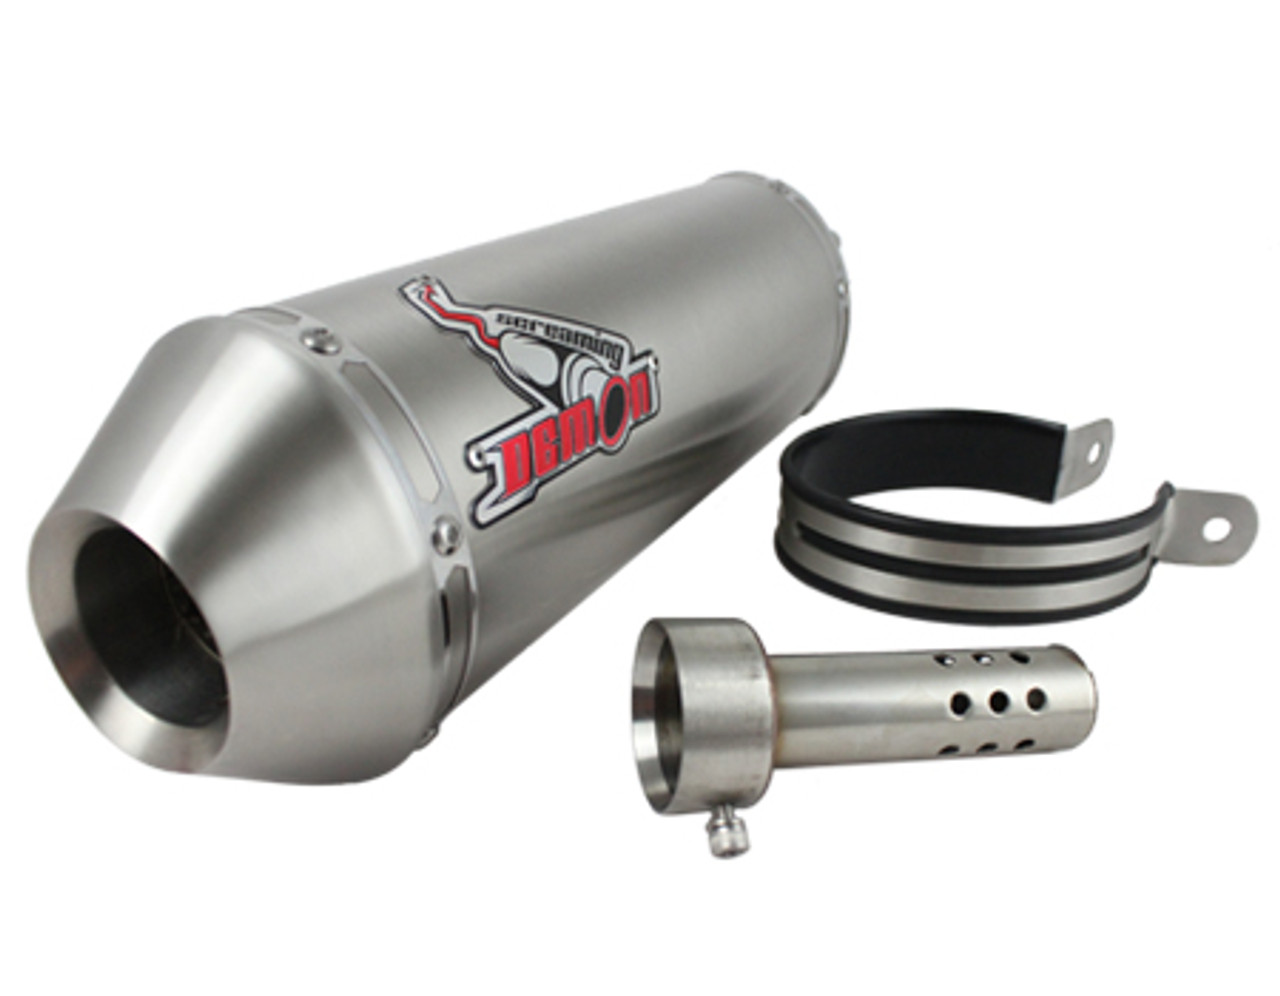 SV-650 2004-2005 Screaming Demon S/S S/O Oval Exhaust